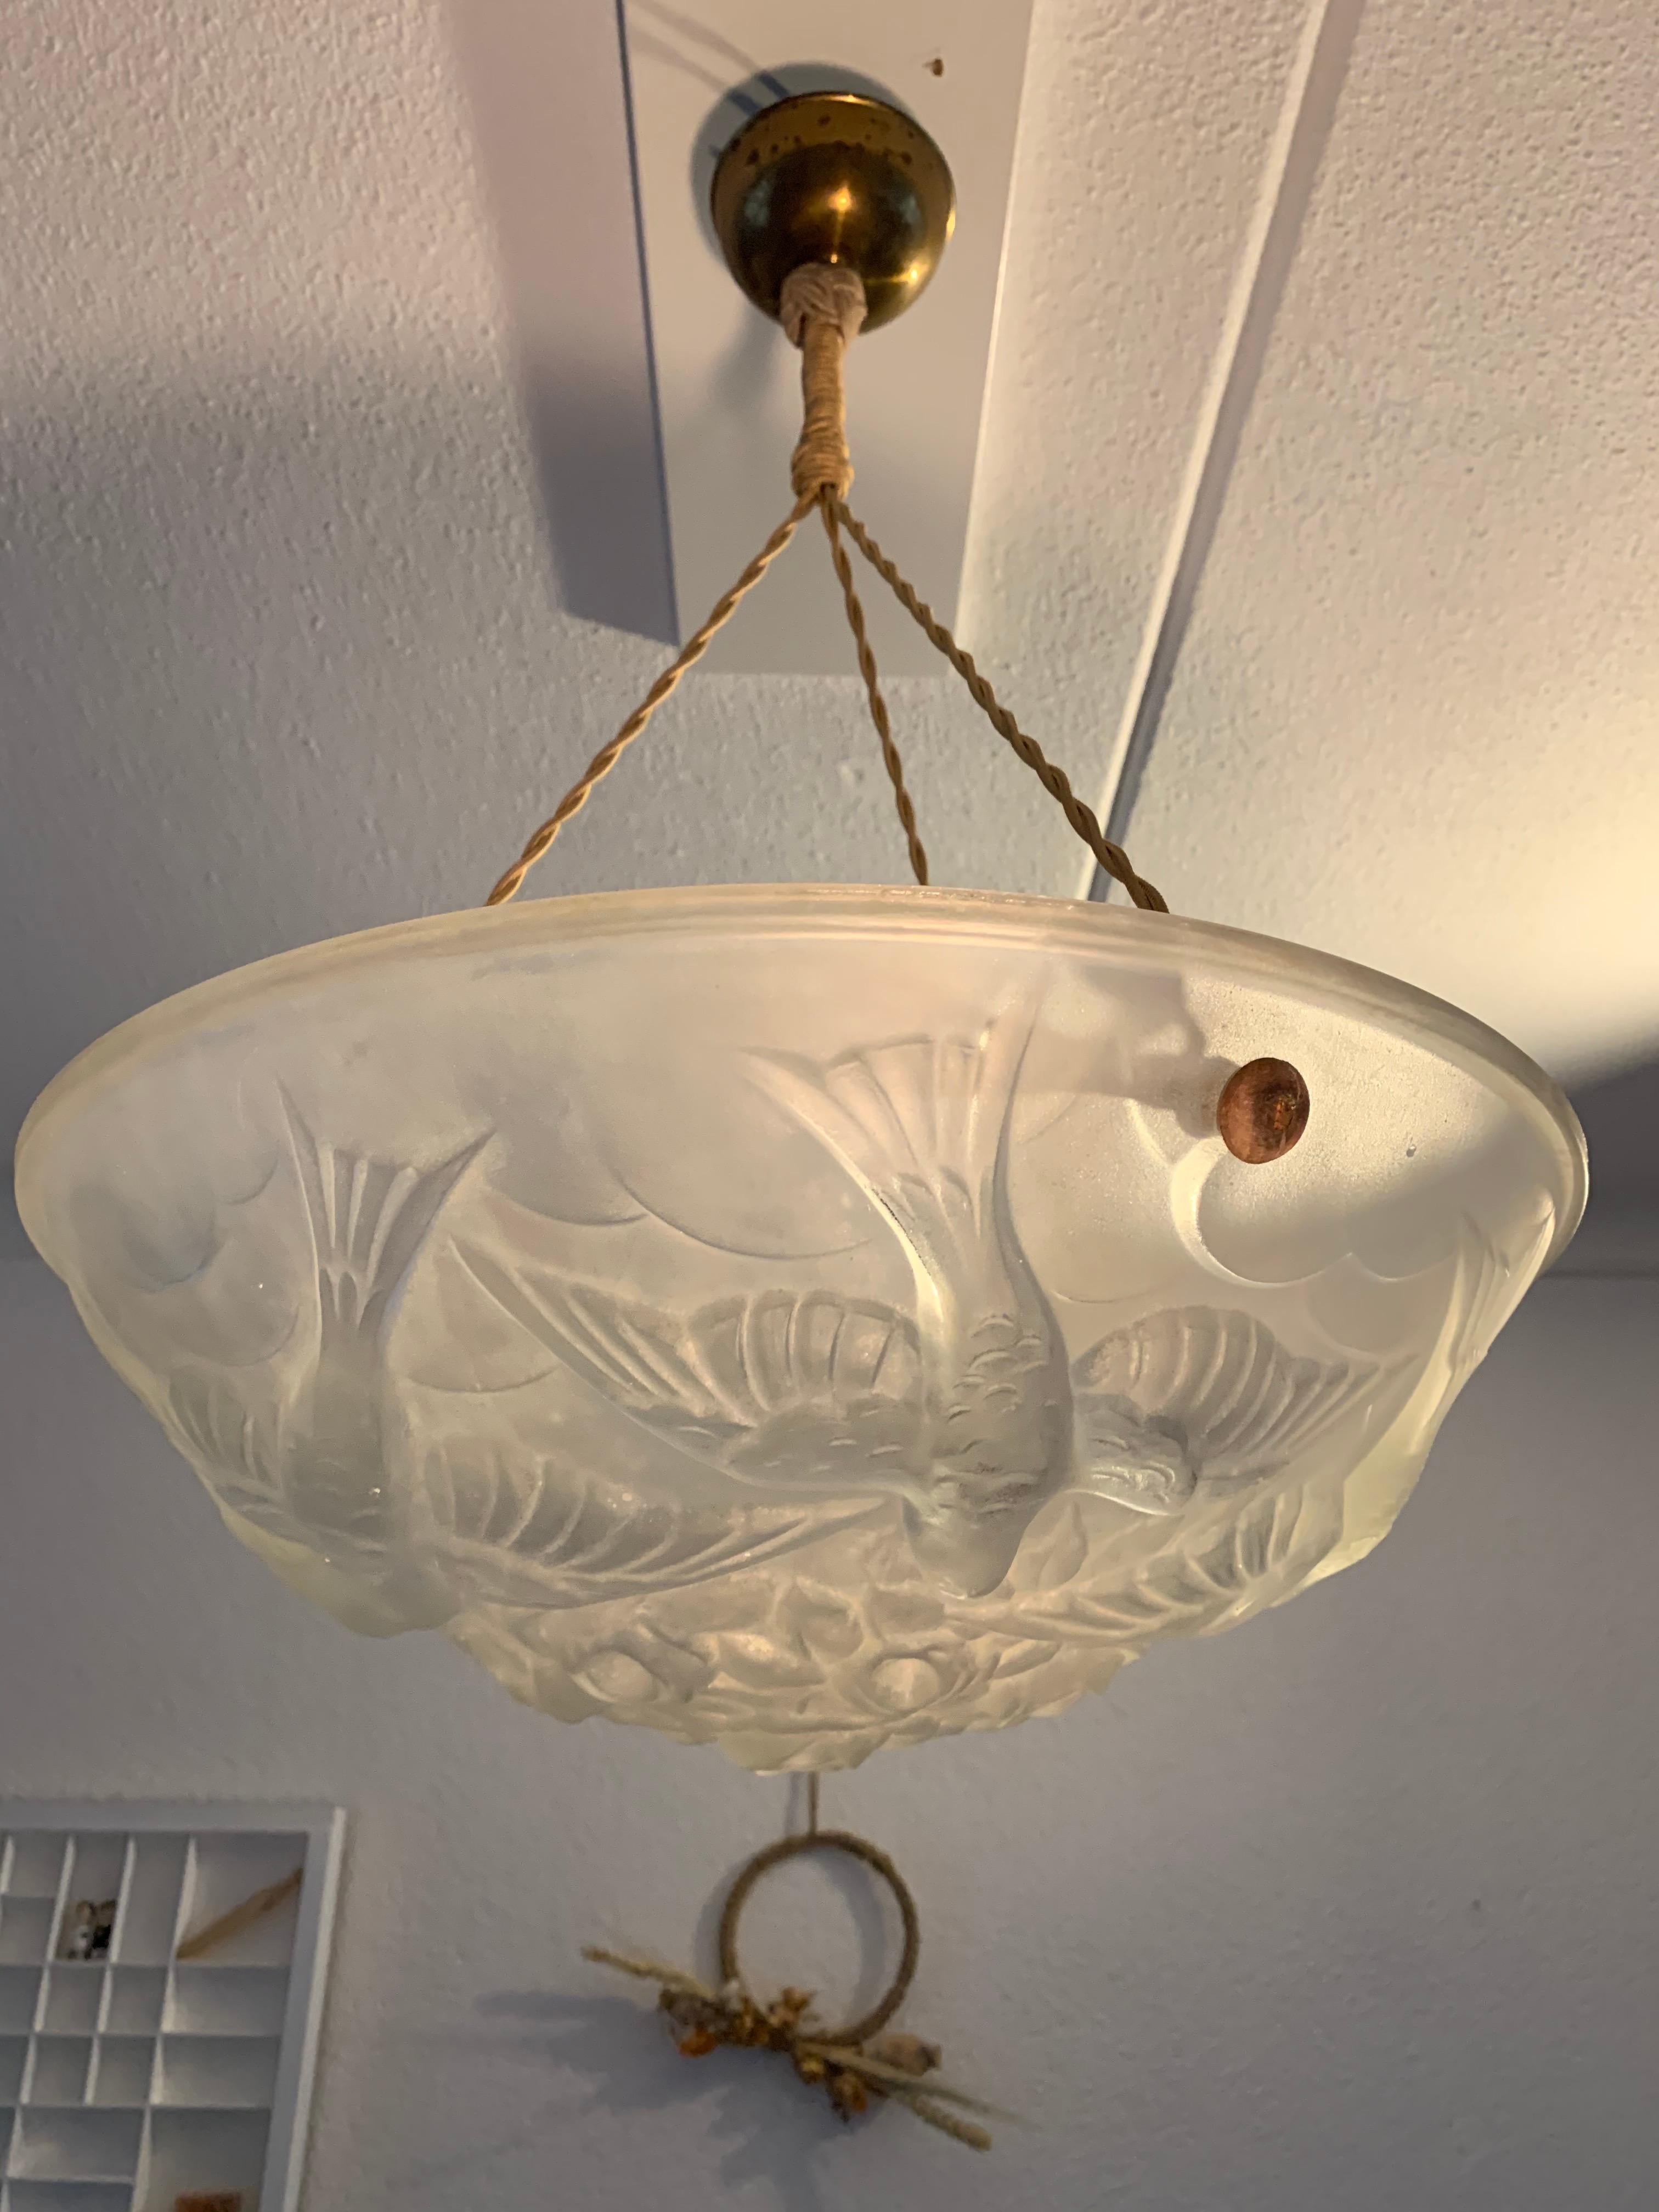 Impressive Art Deco pendant light by Verart with dove sculptures in relief.

This early 20th century, French Art Deco light fixture is another great example of the stylish and meaningful pieces that the French were creating in the 1920s. It is